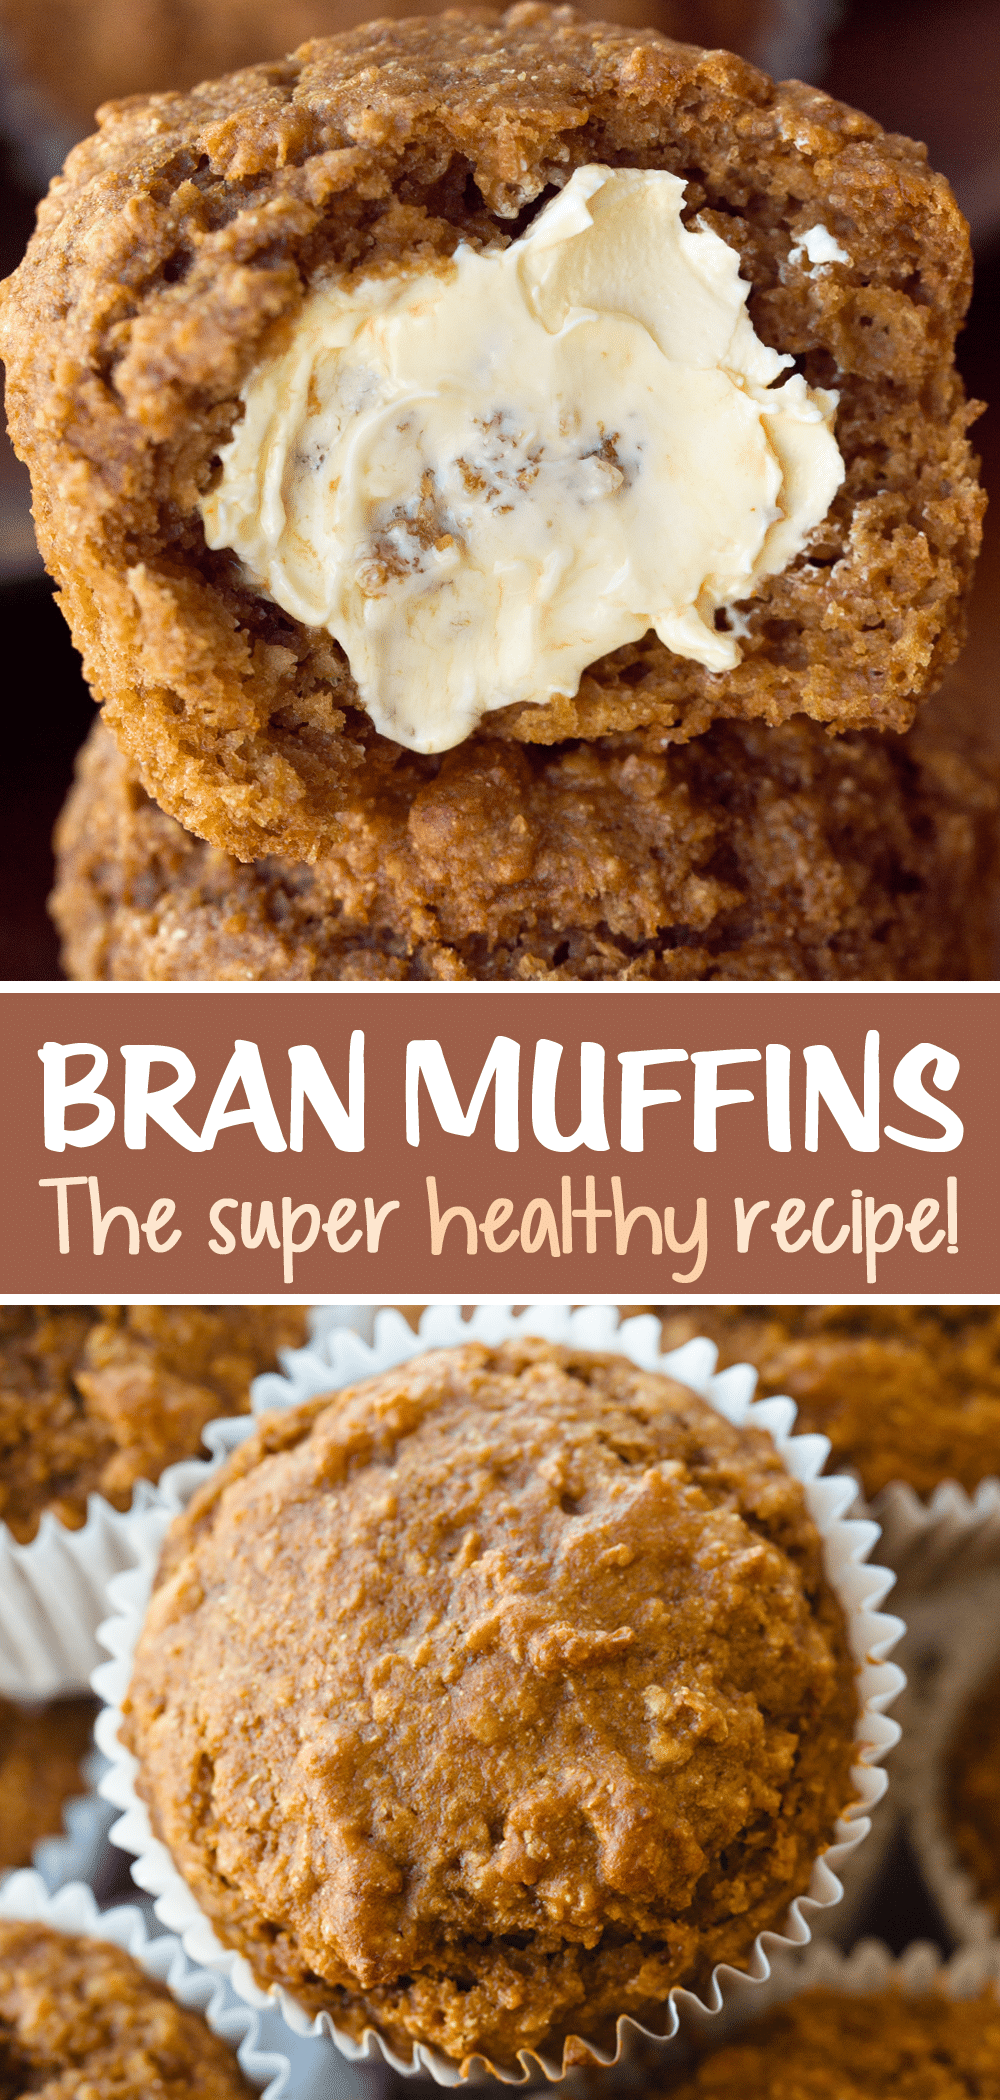 How To Make Bran Muffins From Scratch